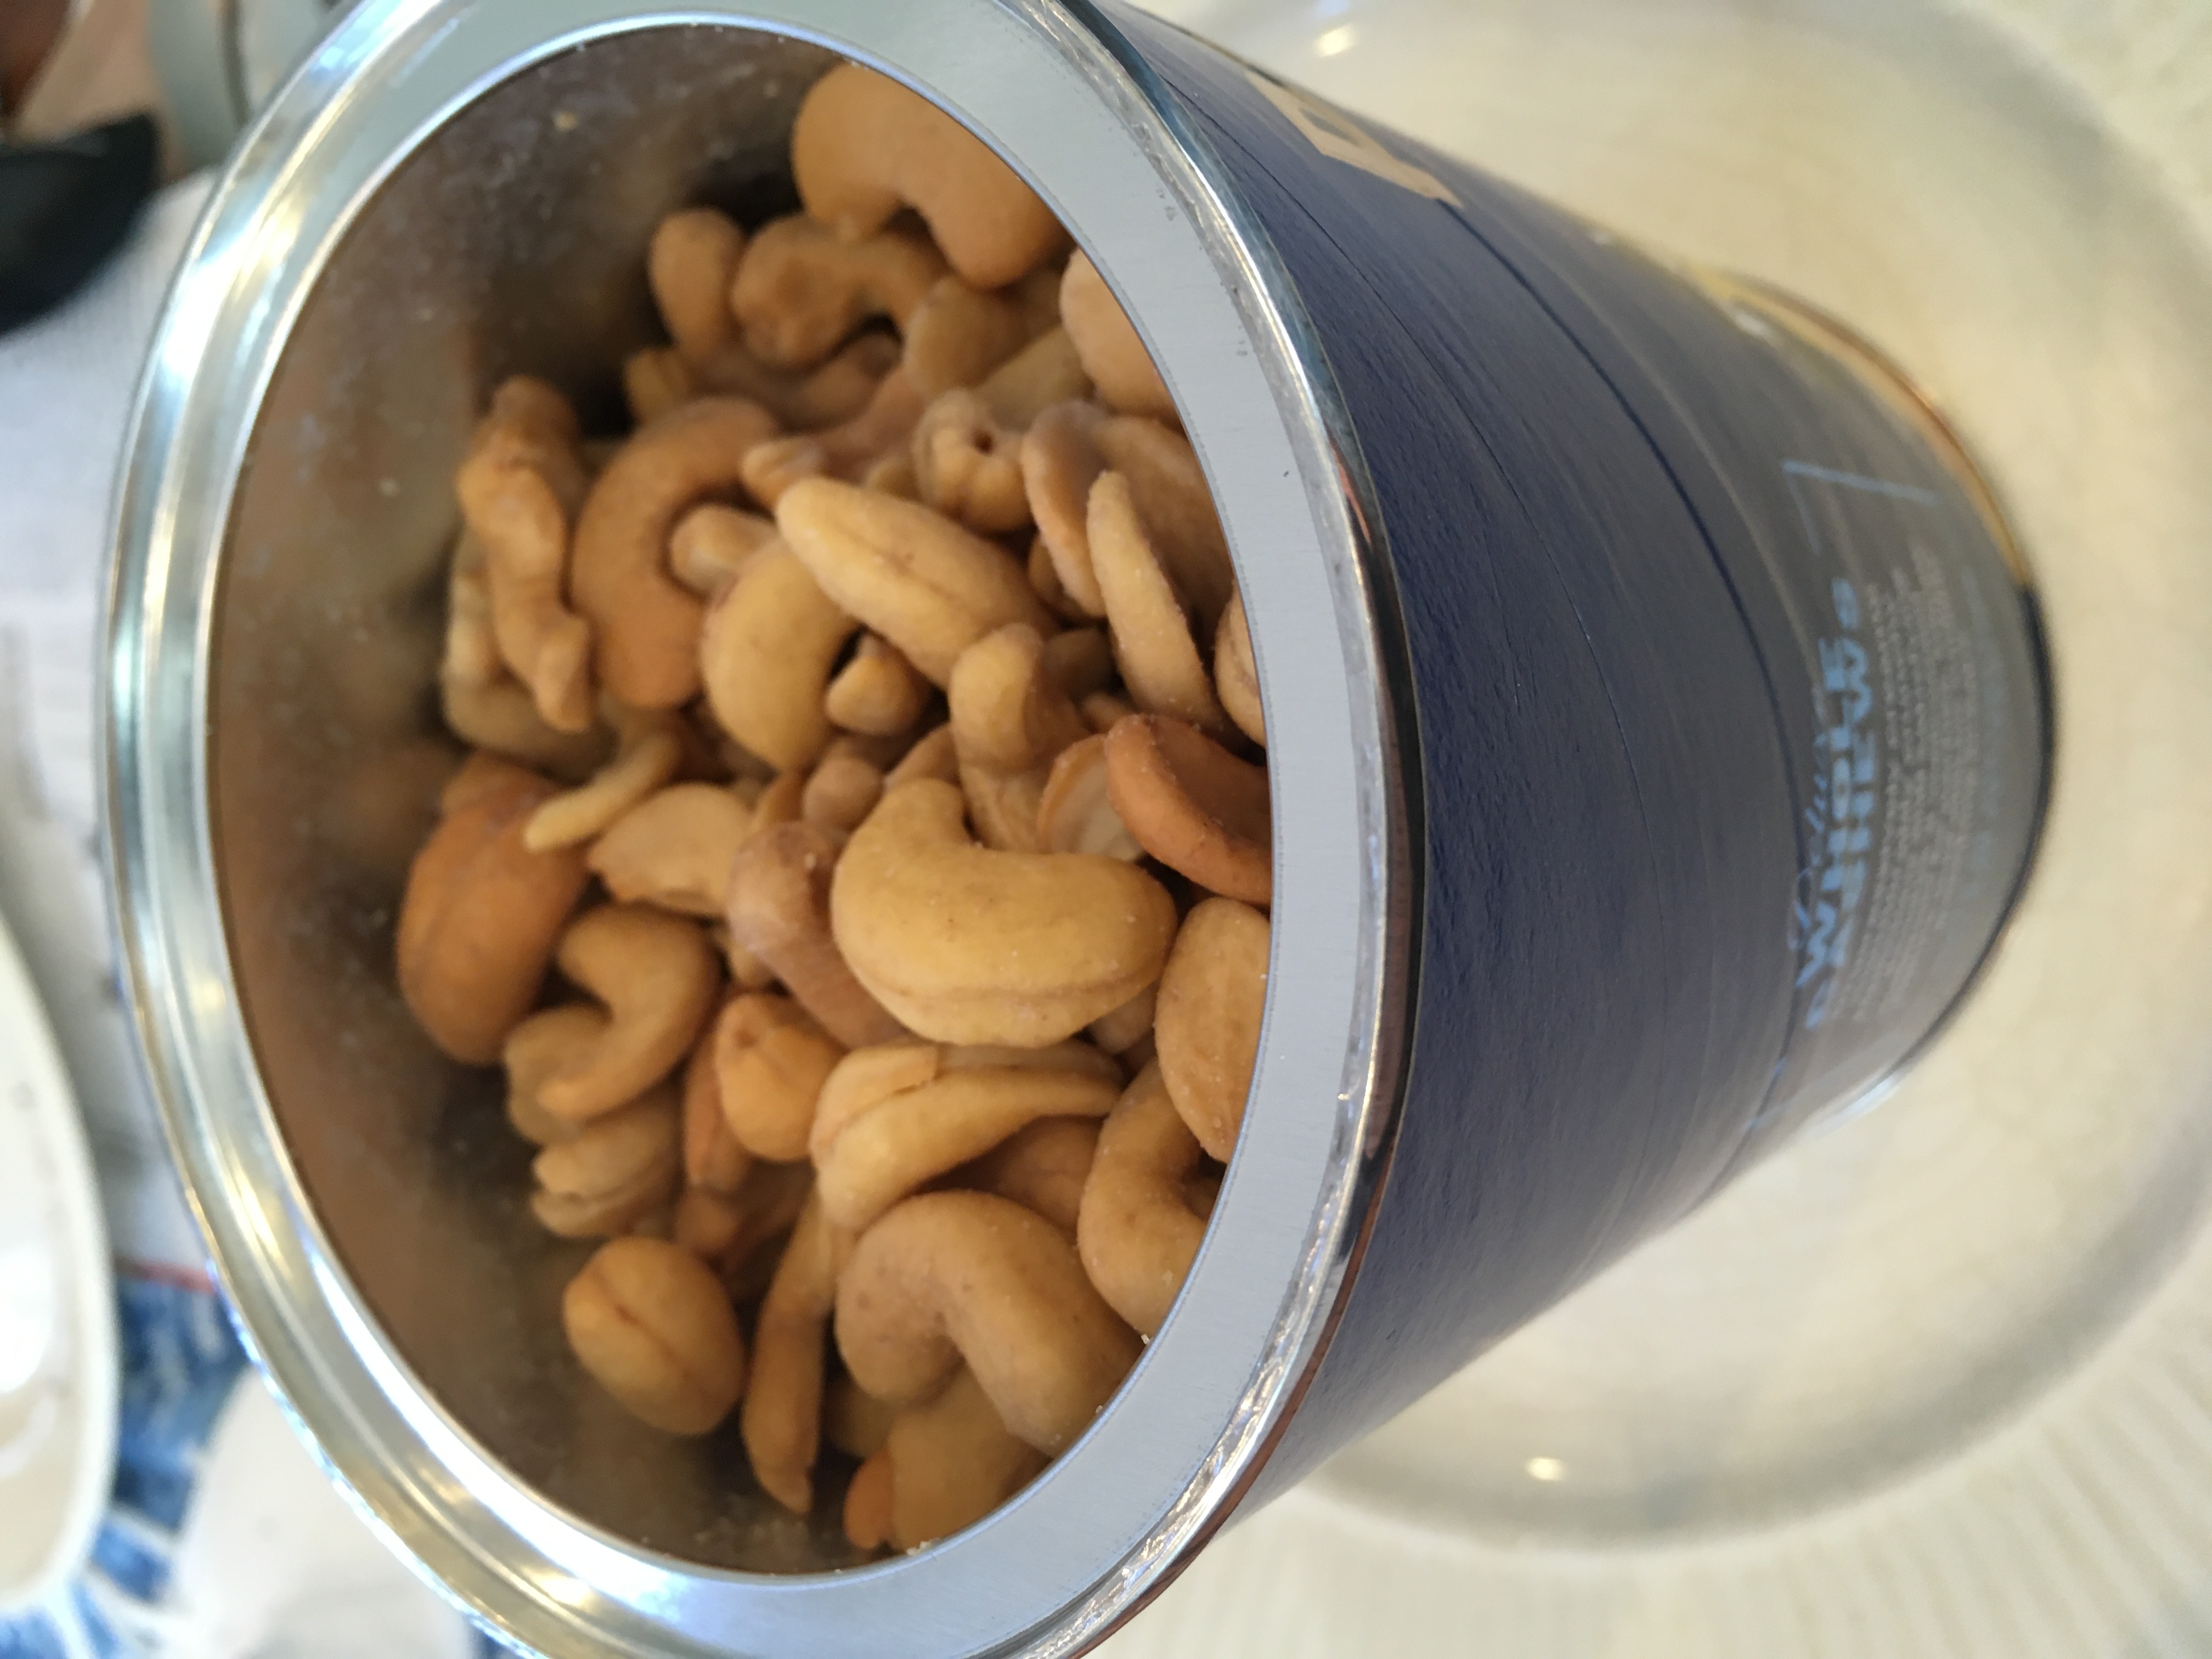 PLANTERS Deluxe Lightly Salted Whole Cashews